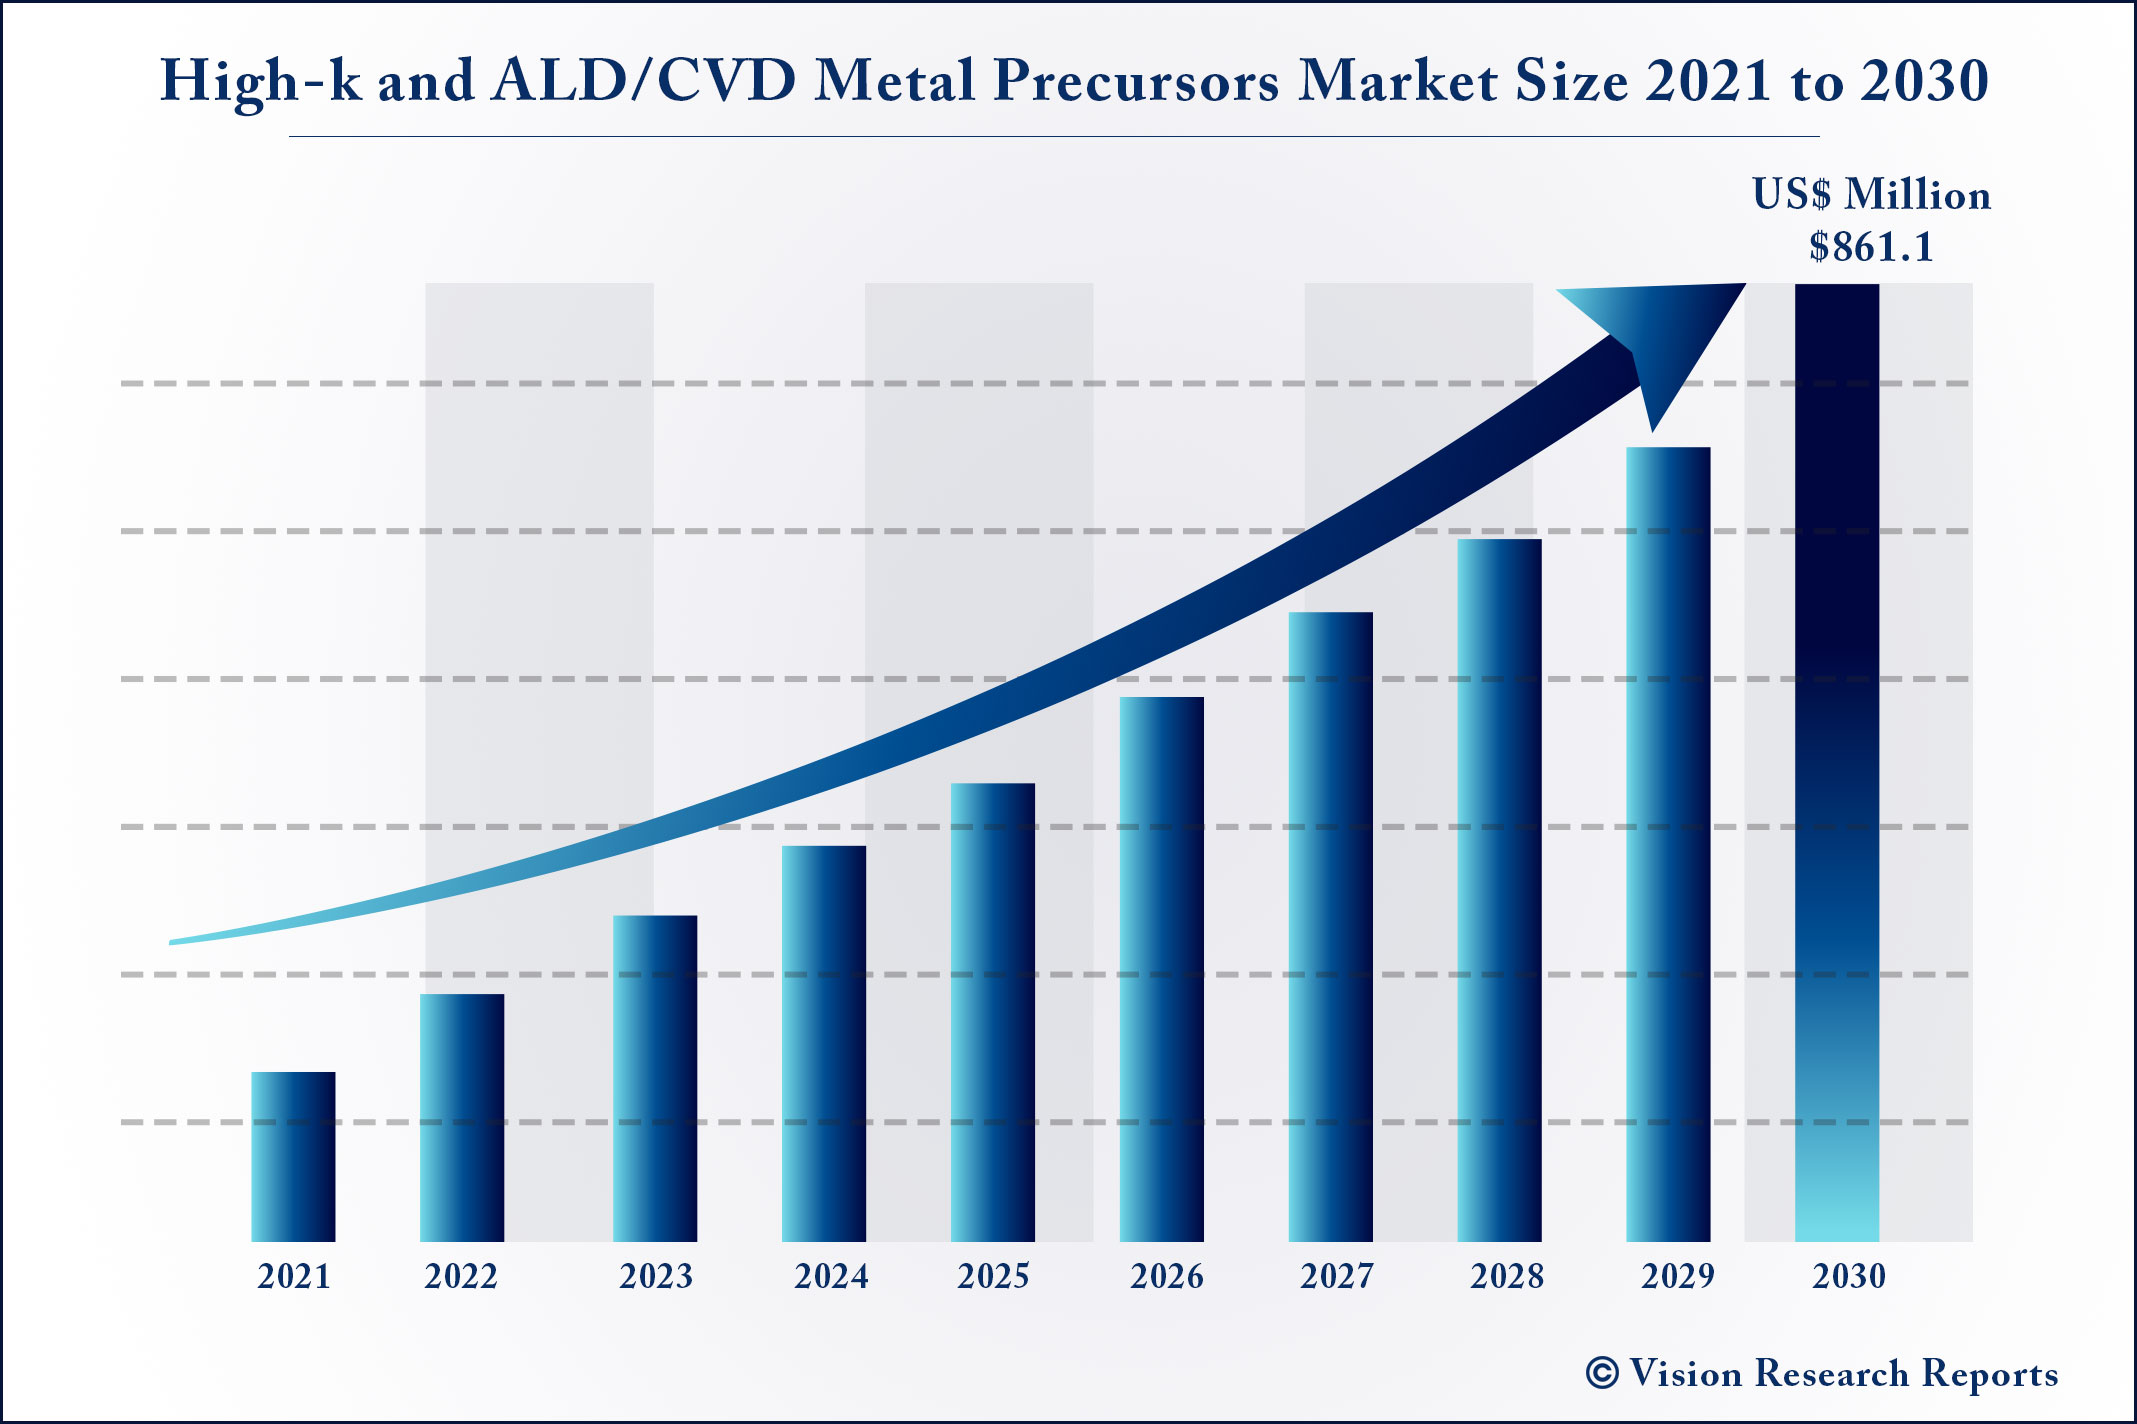 High-k and ALD/CVD Metal Precursors Market Size 2021 to 2030